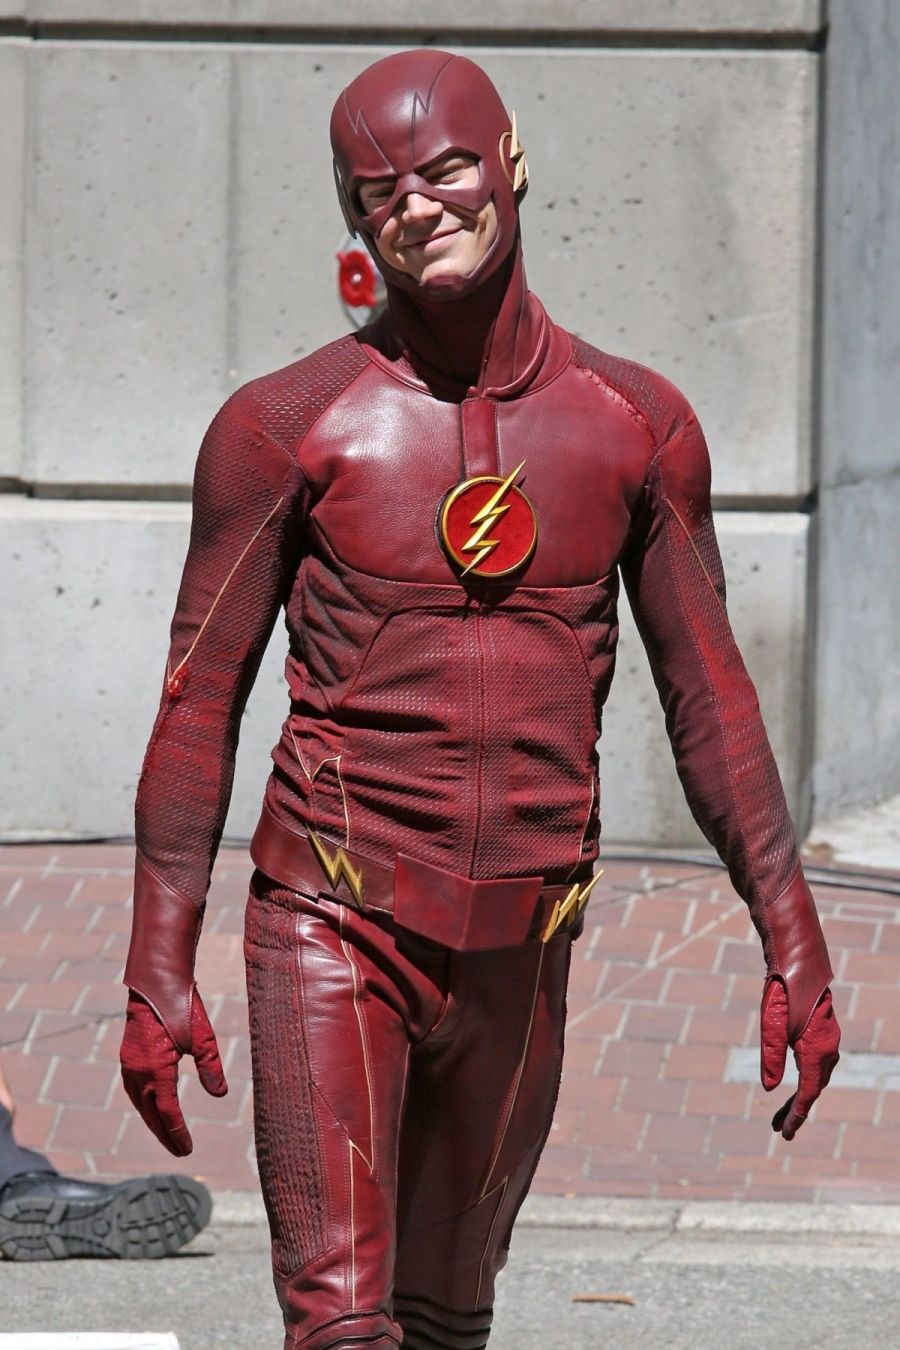 grant-gustin-filming-for-the-flash-season-5-in-vancouver-12.jpg